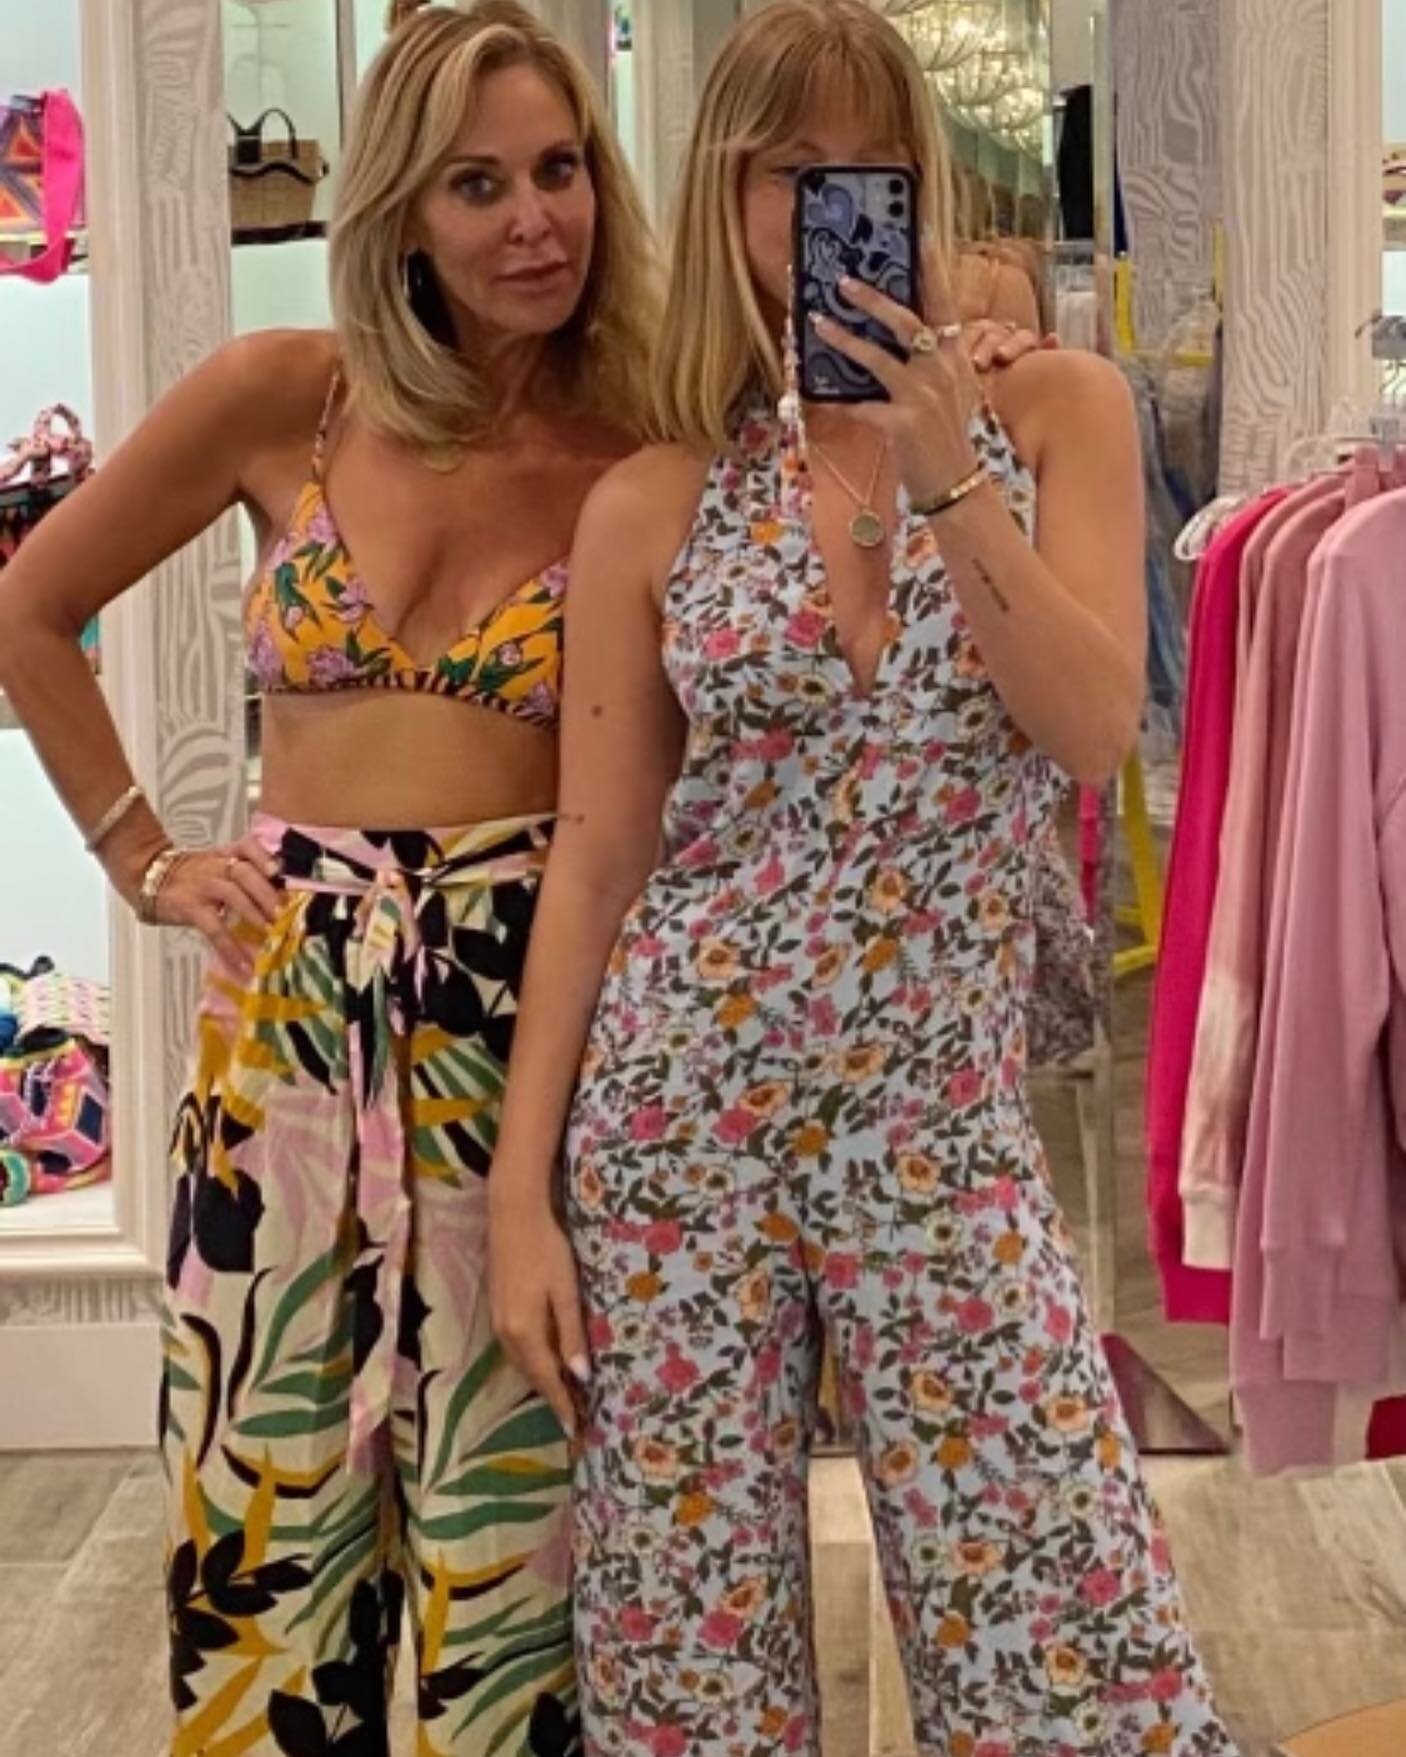 Summer is right around the corner!! Stop by Love Shack for all your trendiest summer fashions. .#trendy #summer #bathingsuits #dresses #beachwear #fashion #loveshackdelray #delray